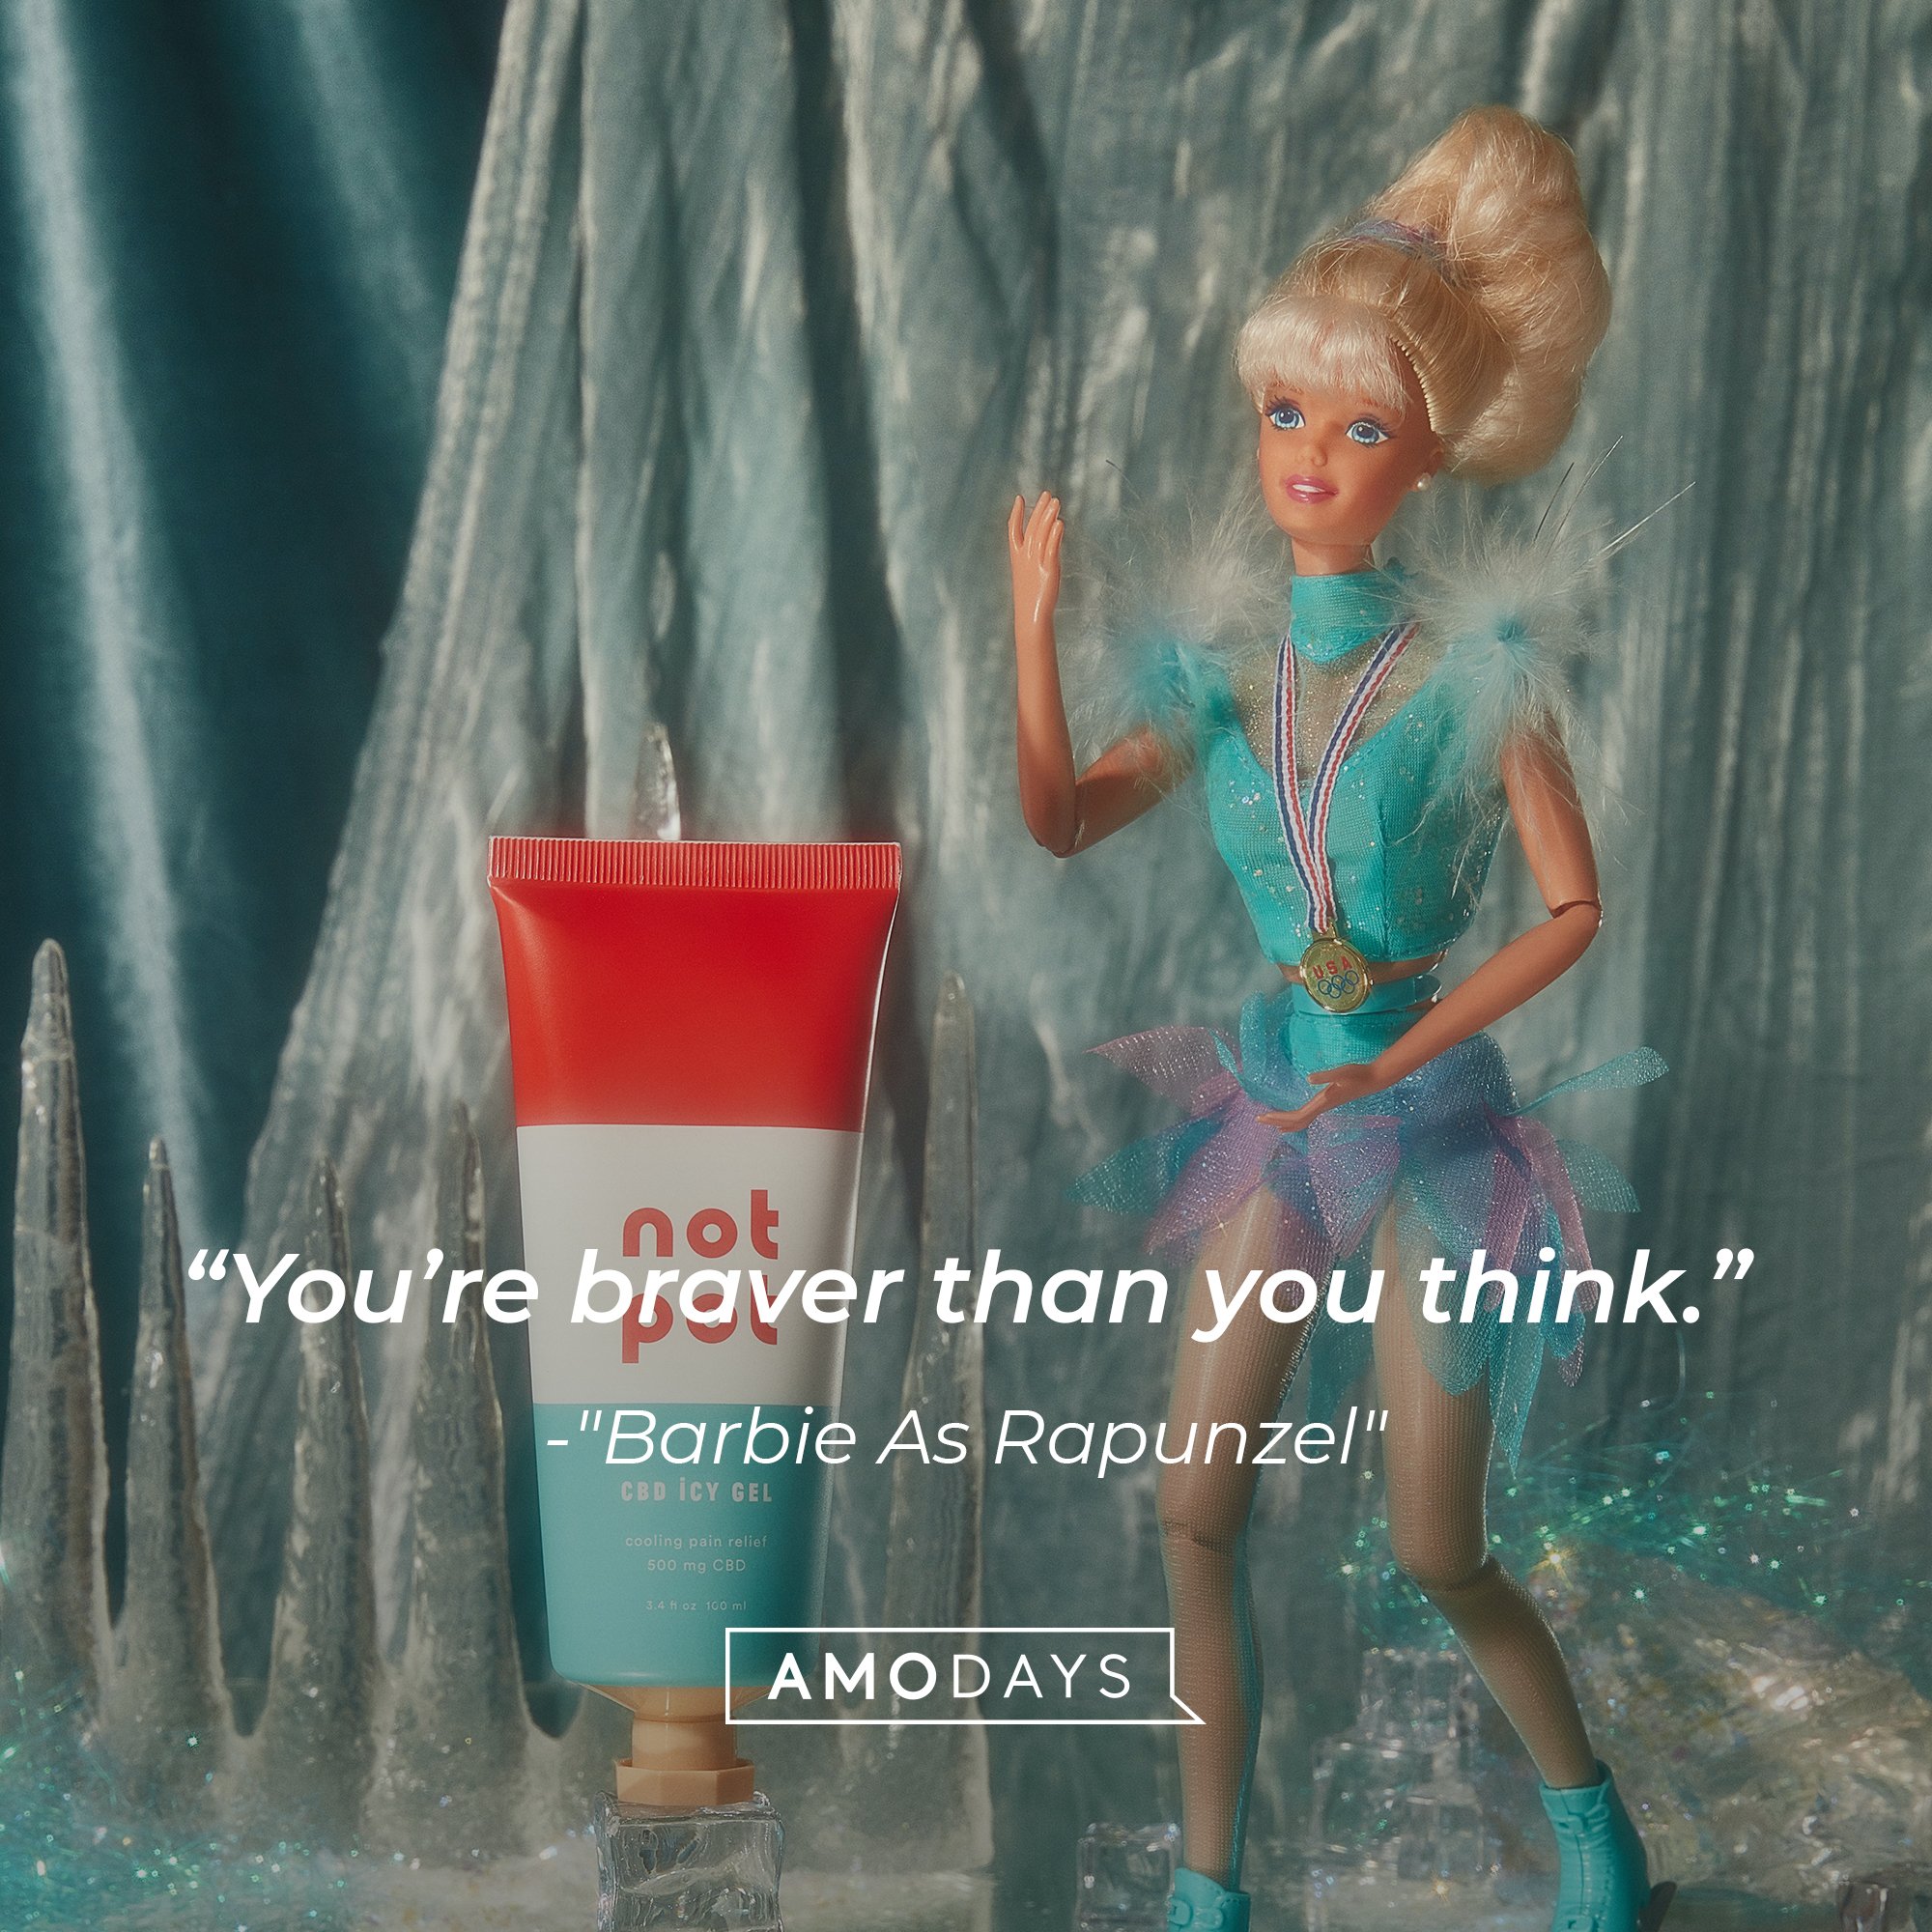 "Barbie In Swan Lake's" quote: "You’re braver than you think." | Image: AmoDays